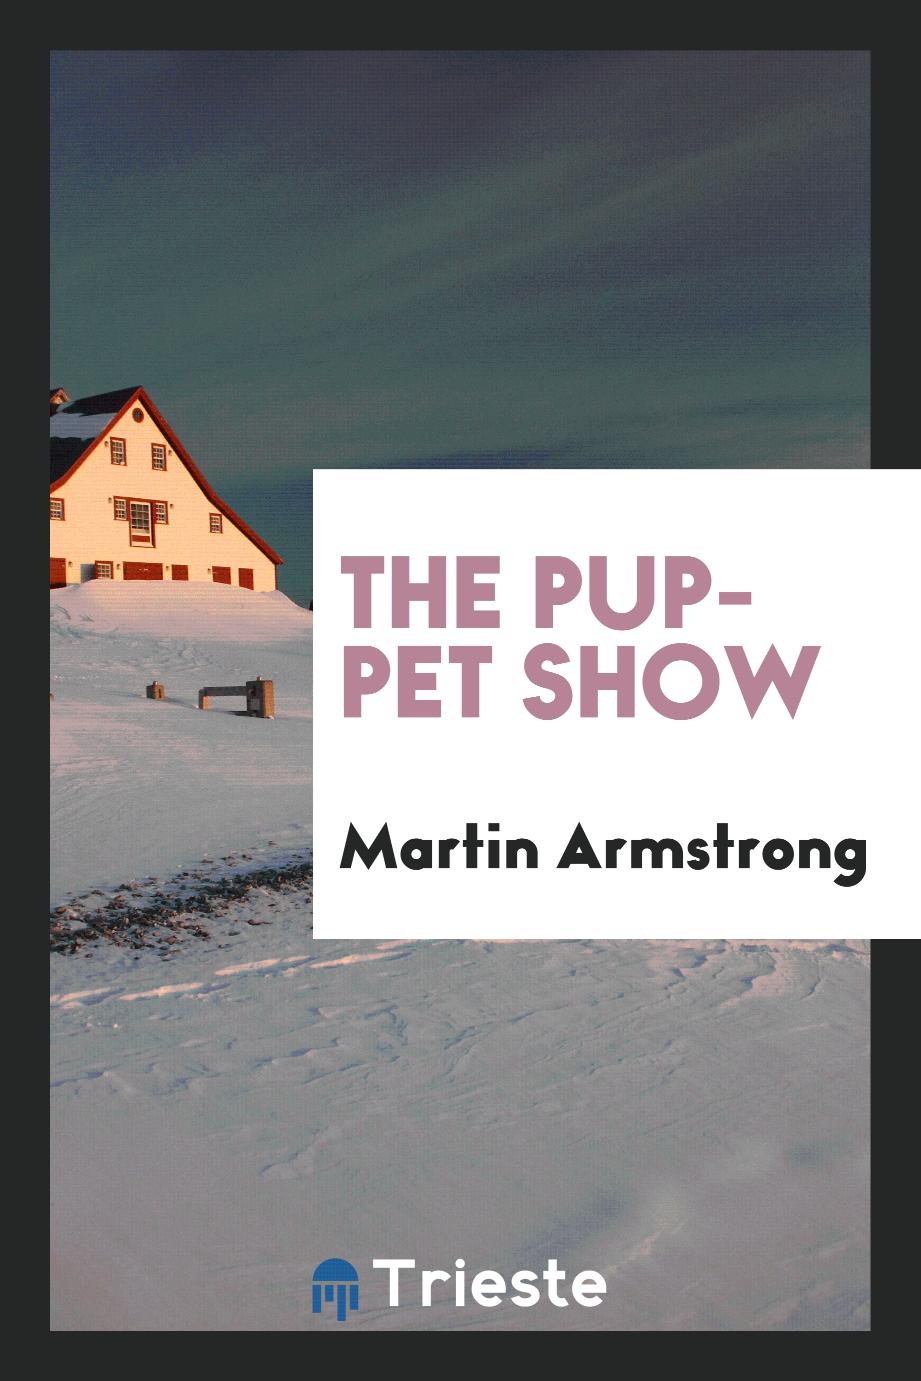 Martin Armstrong - The puppet show